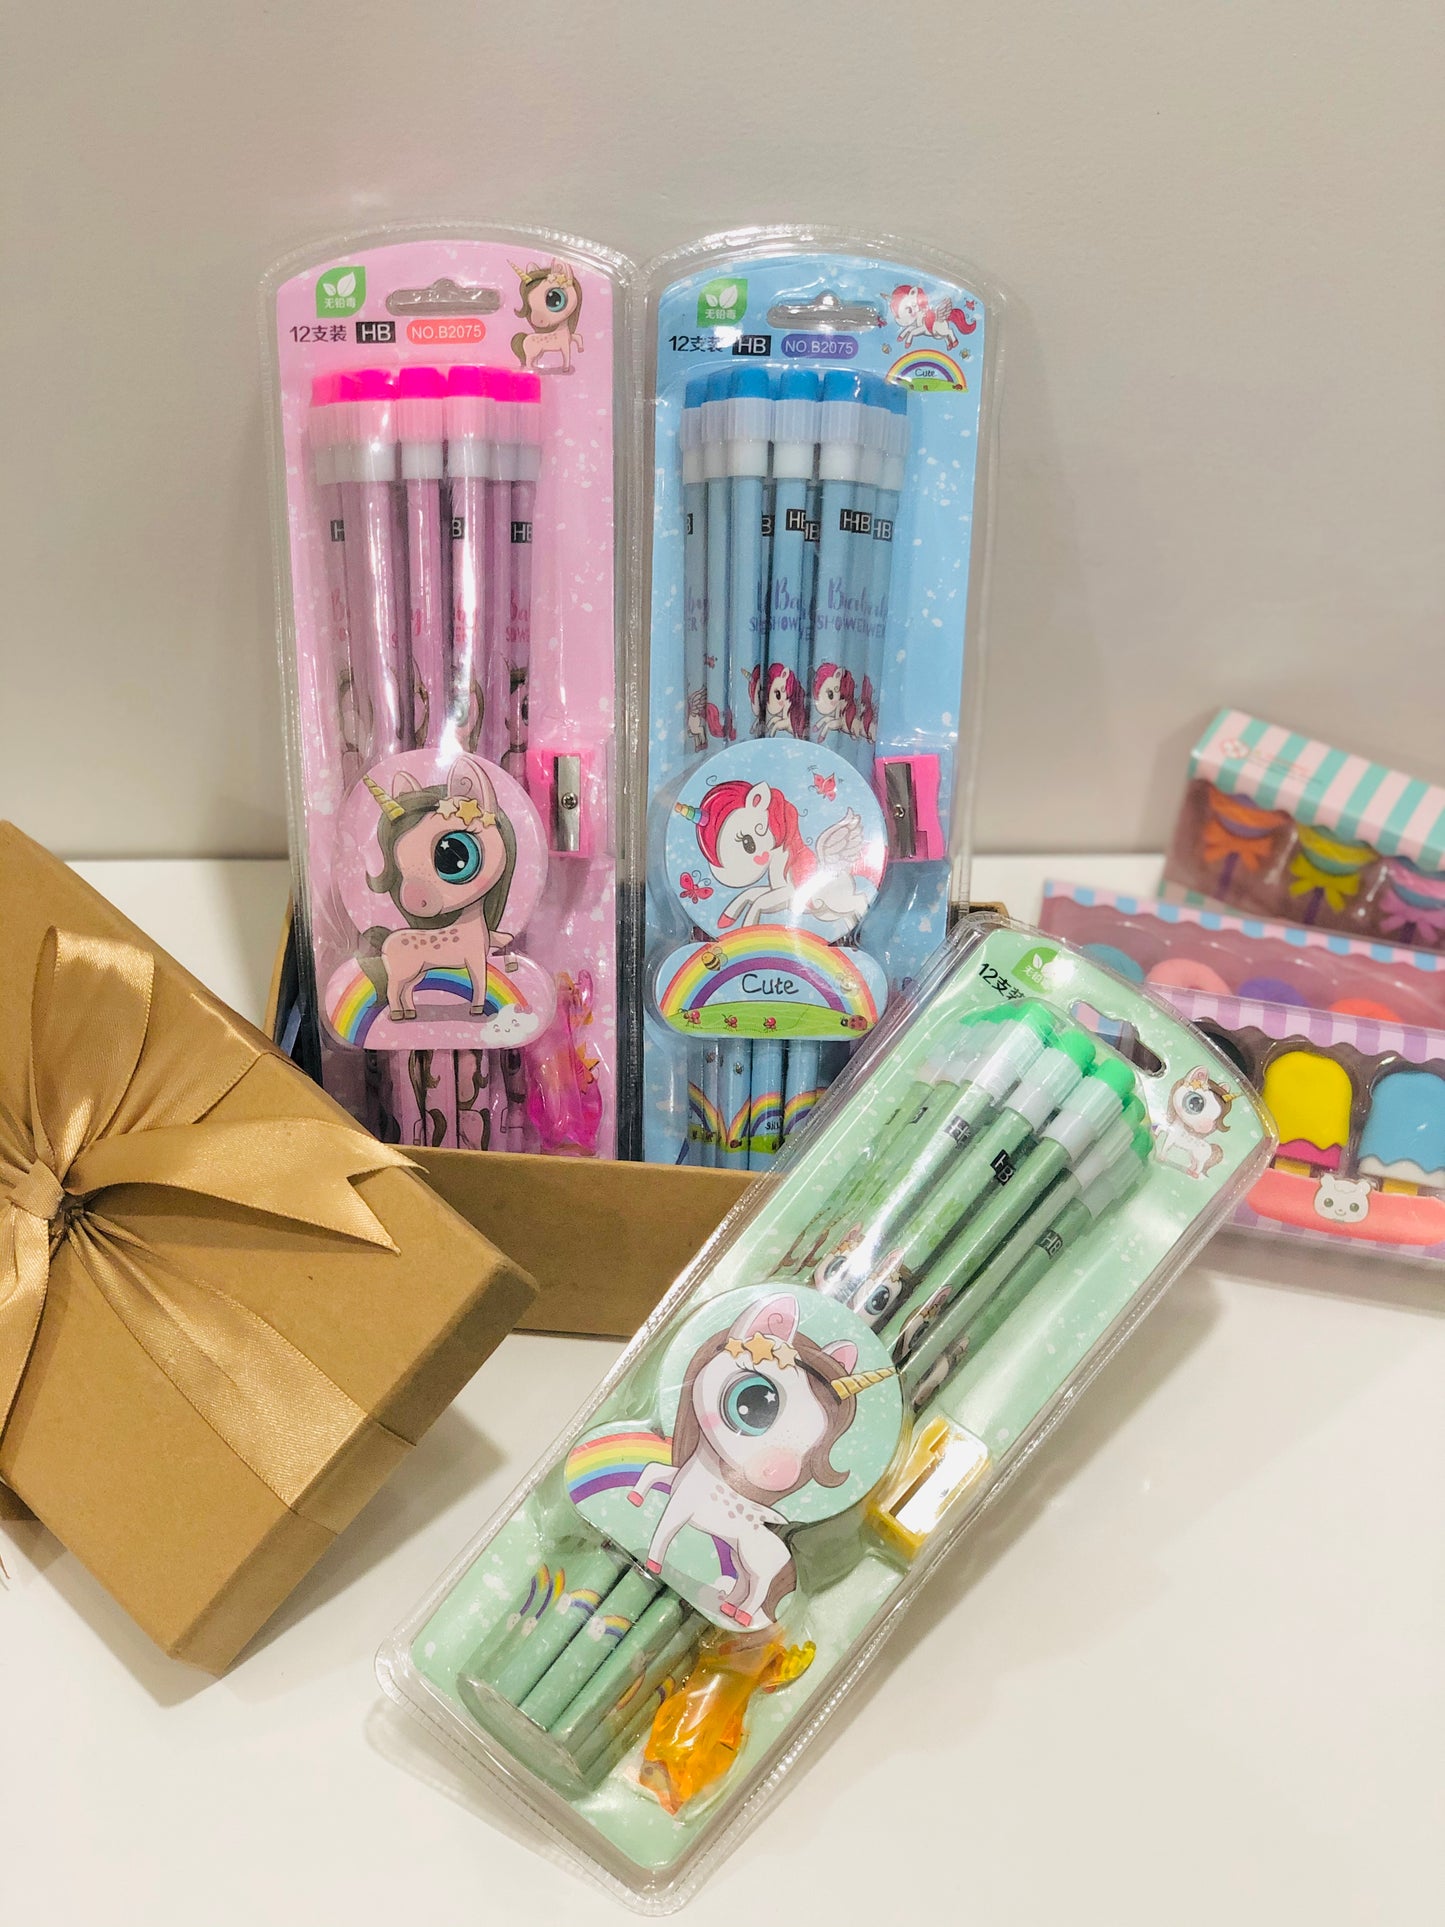 Pencil Set with Erasers